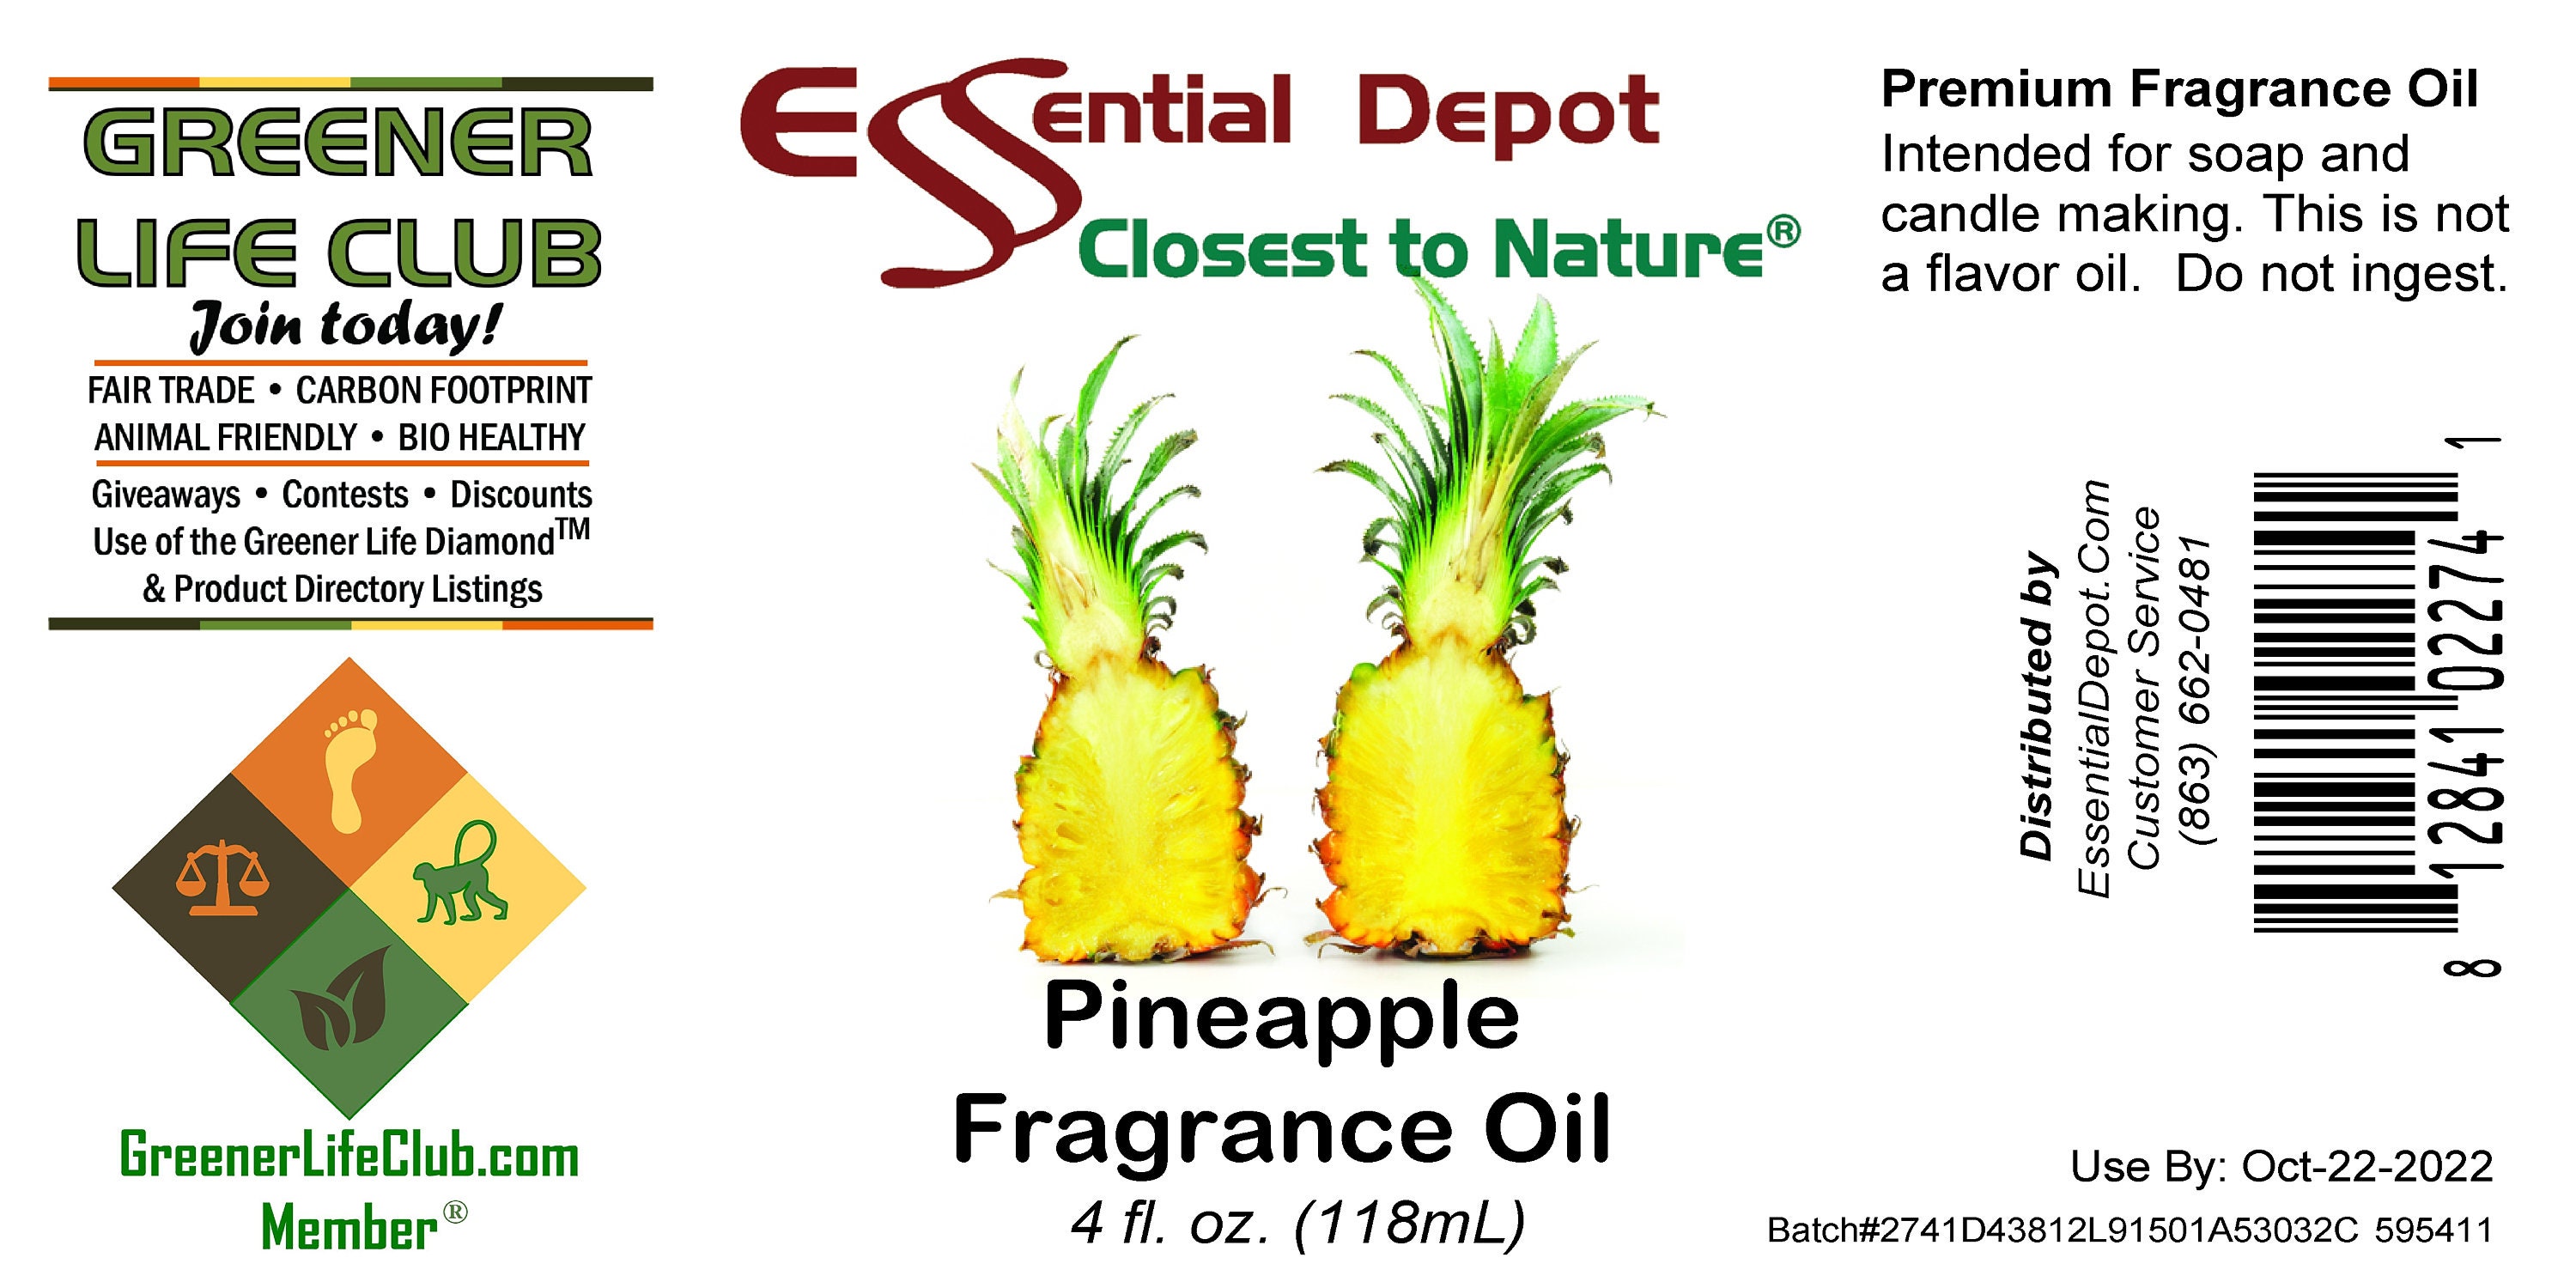 US Organic Pineapple Fragrance Oil (Oil Soluble), USDA Certified Organic,  for Candle, Soap Making, DIY Projects, and Small Businesses_2 fl oz